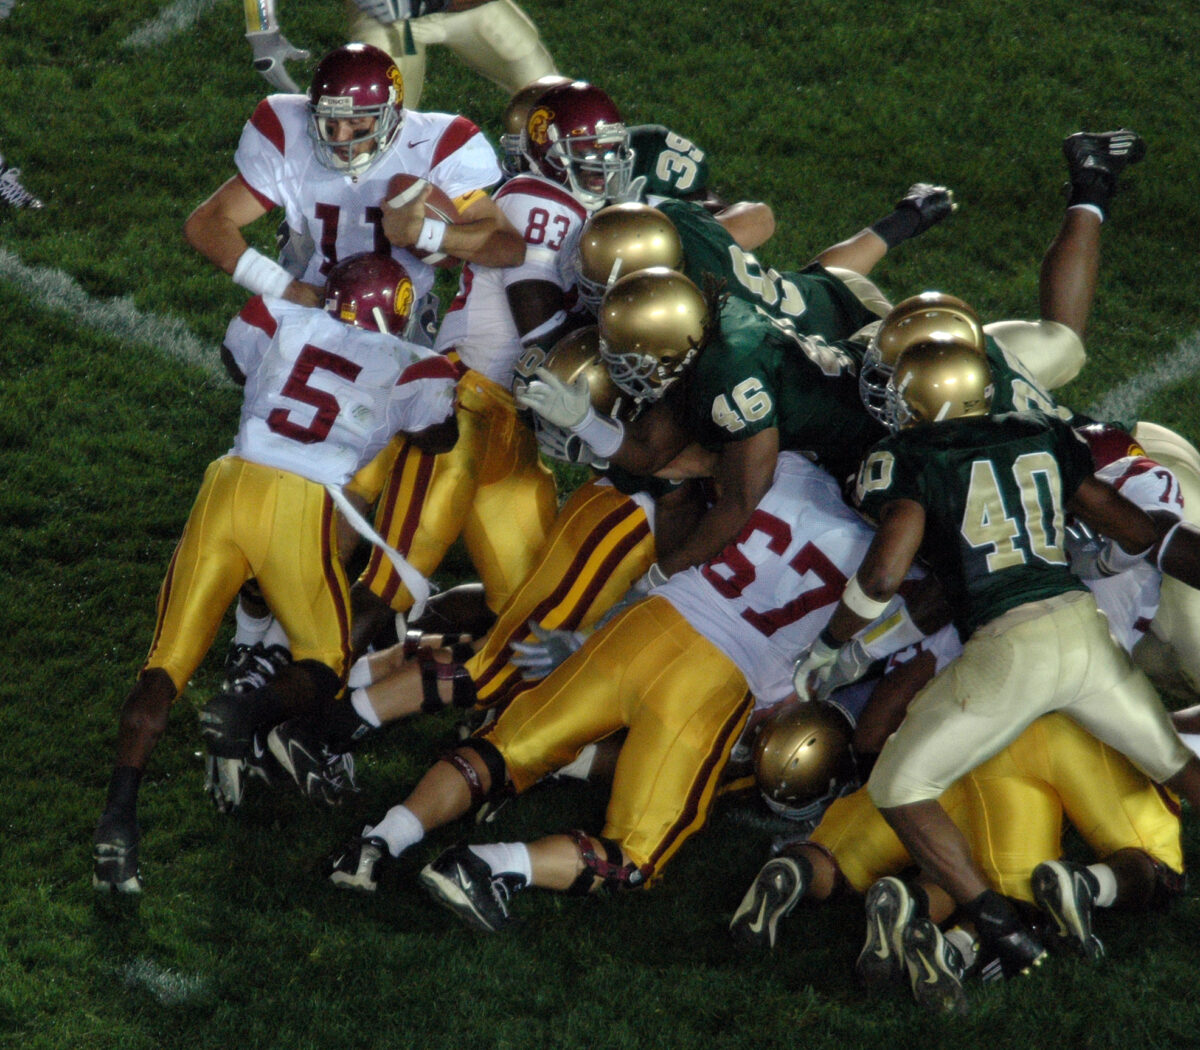 Saturday, October 15, 2005: USC-Notre Dame was the best part of CFB’s greatest Saturday ever